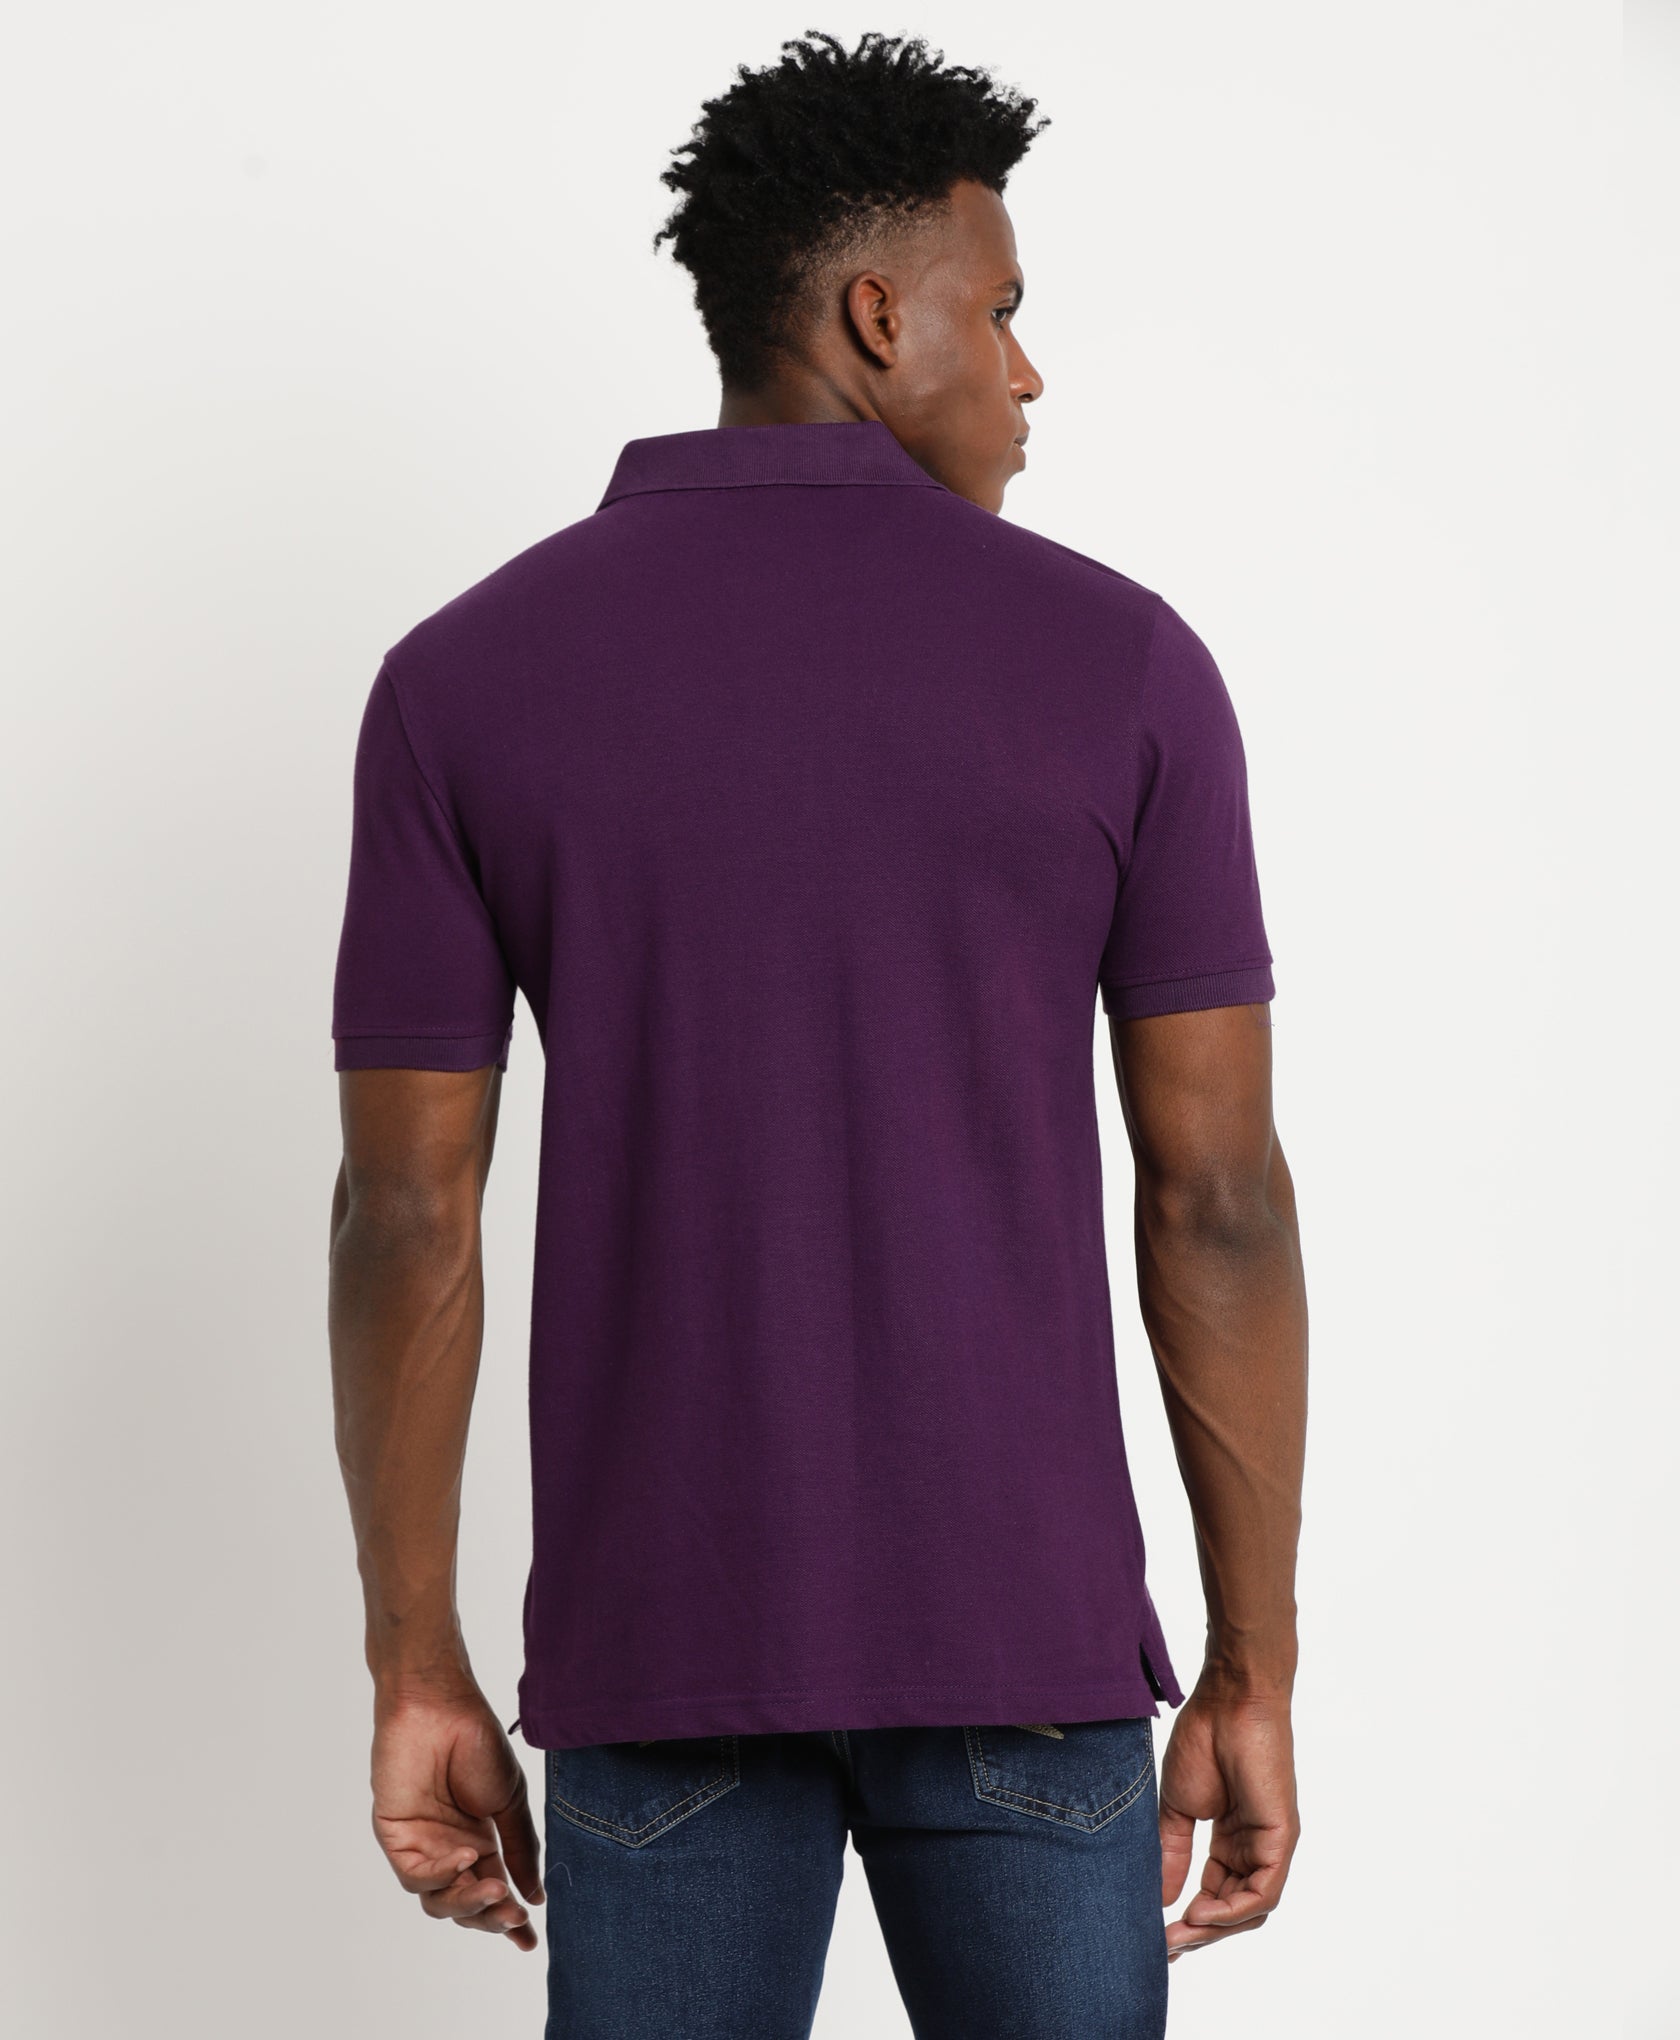 Young Beautiful male model in purple polo T-shirt and dark black